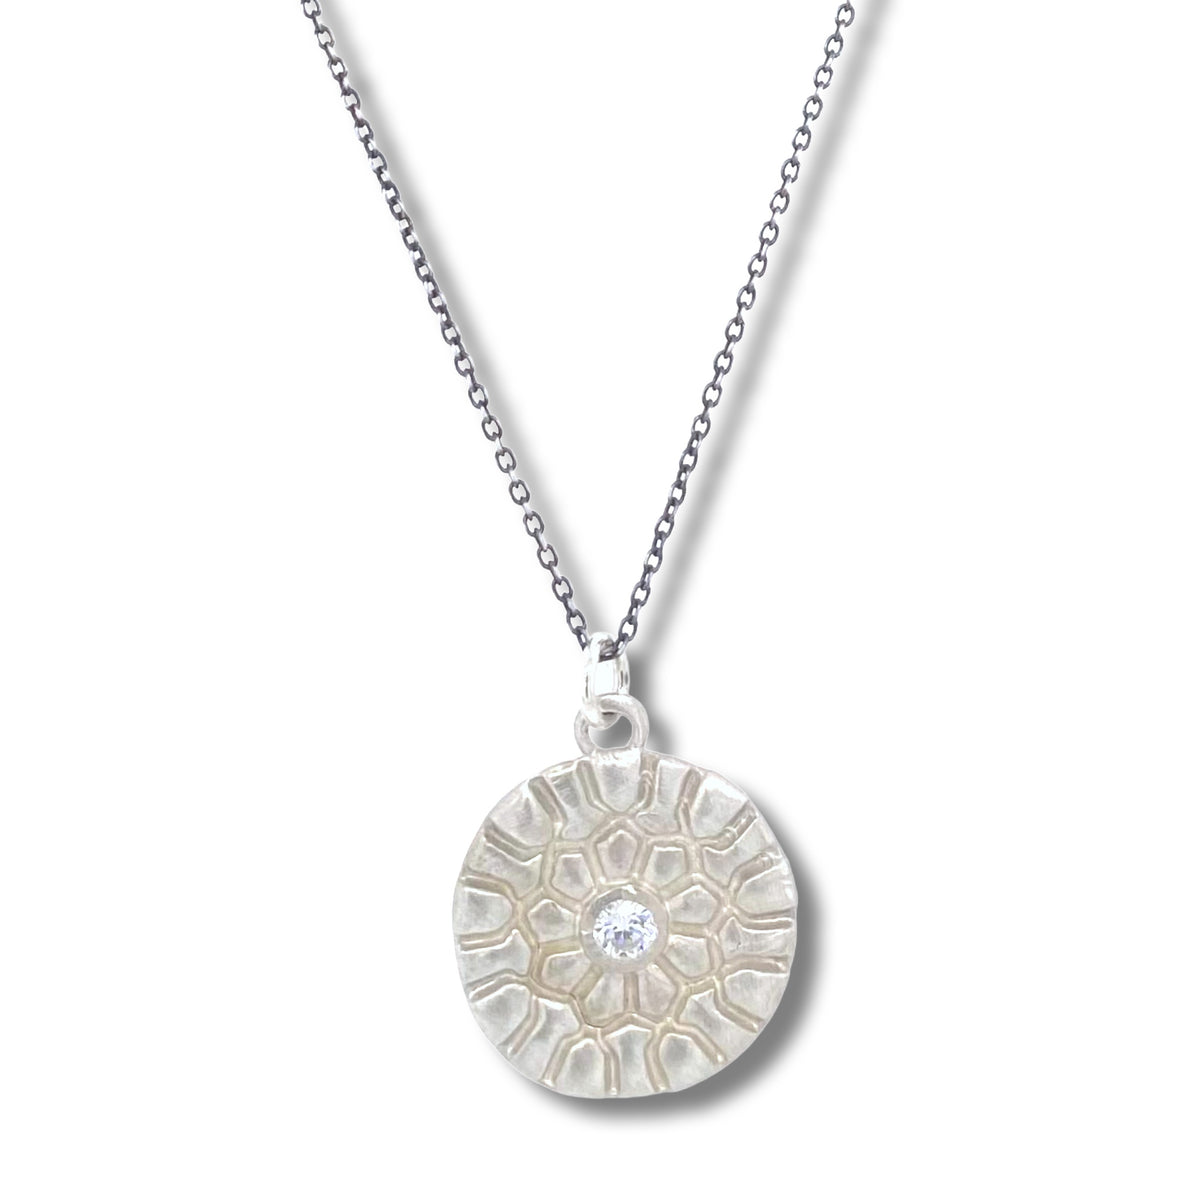 Essa Necklace in Silver | Keely Smith Jewelry Designs